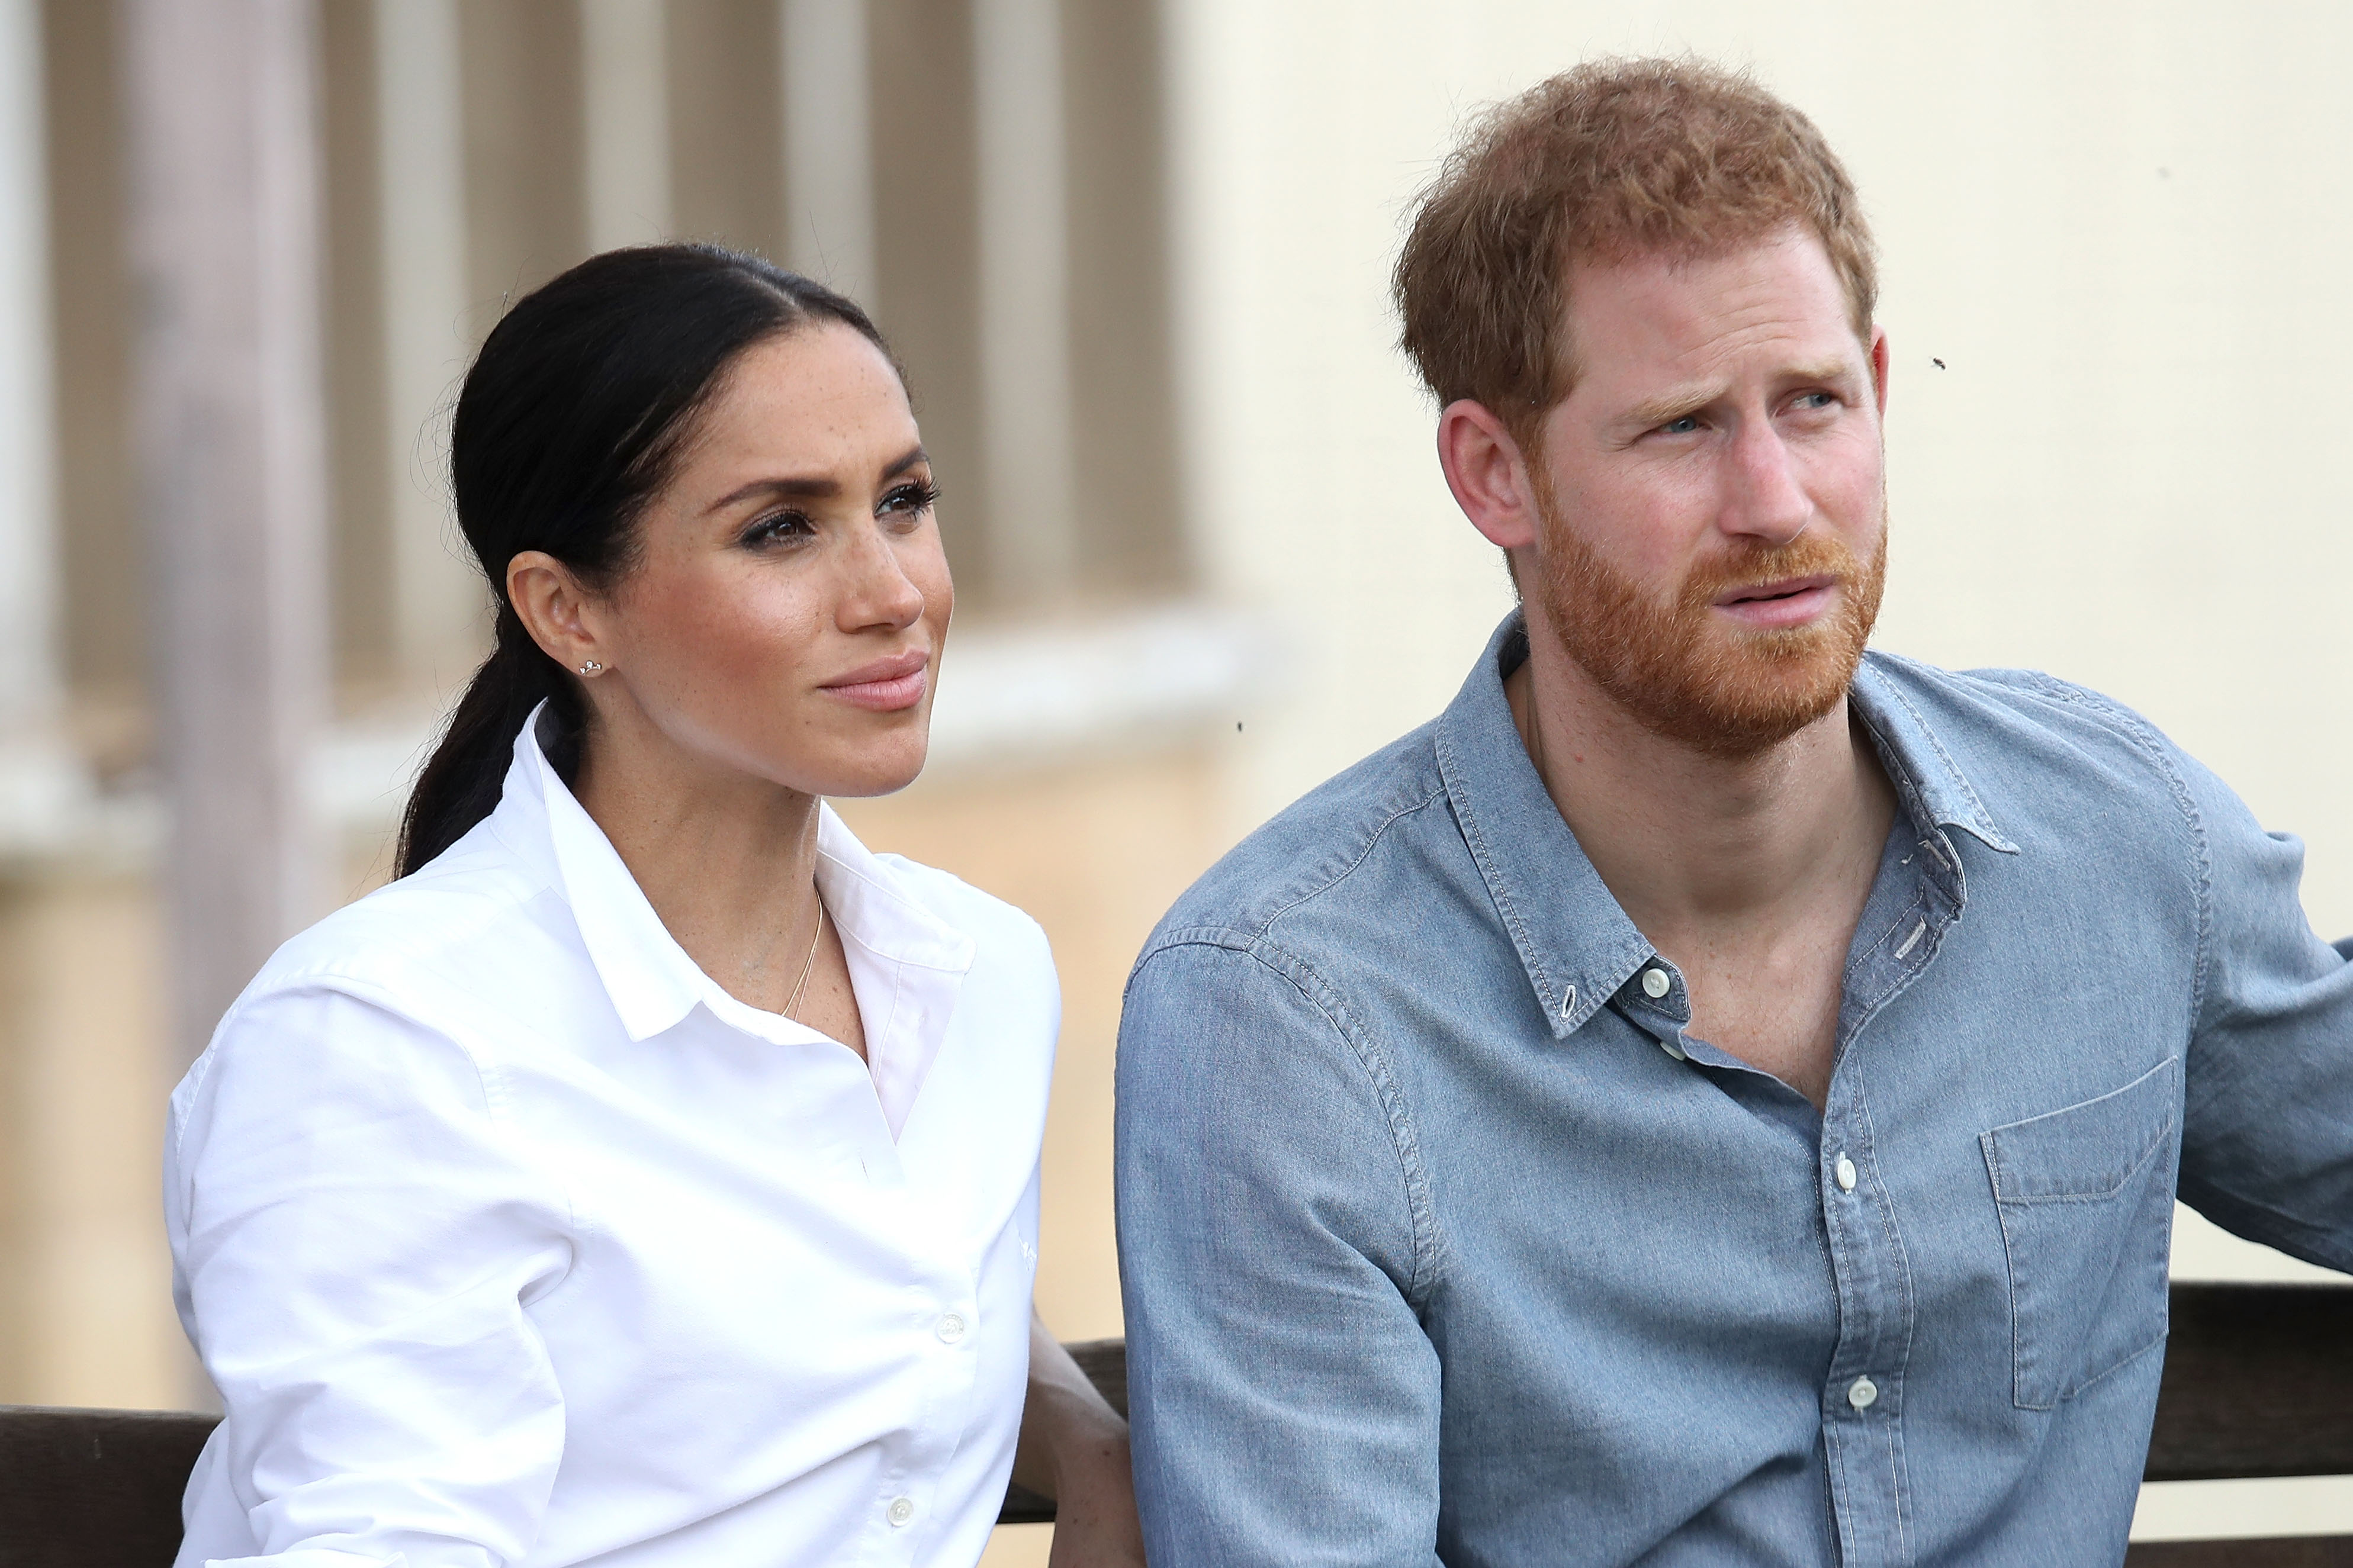 Princess Diana’s Former Bodyguard Says Prince Harry Isn’t Happy, Claims ‘Something Is Not Quite Right’ With Harry and Meghan Markle 